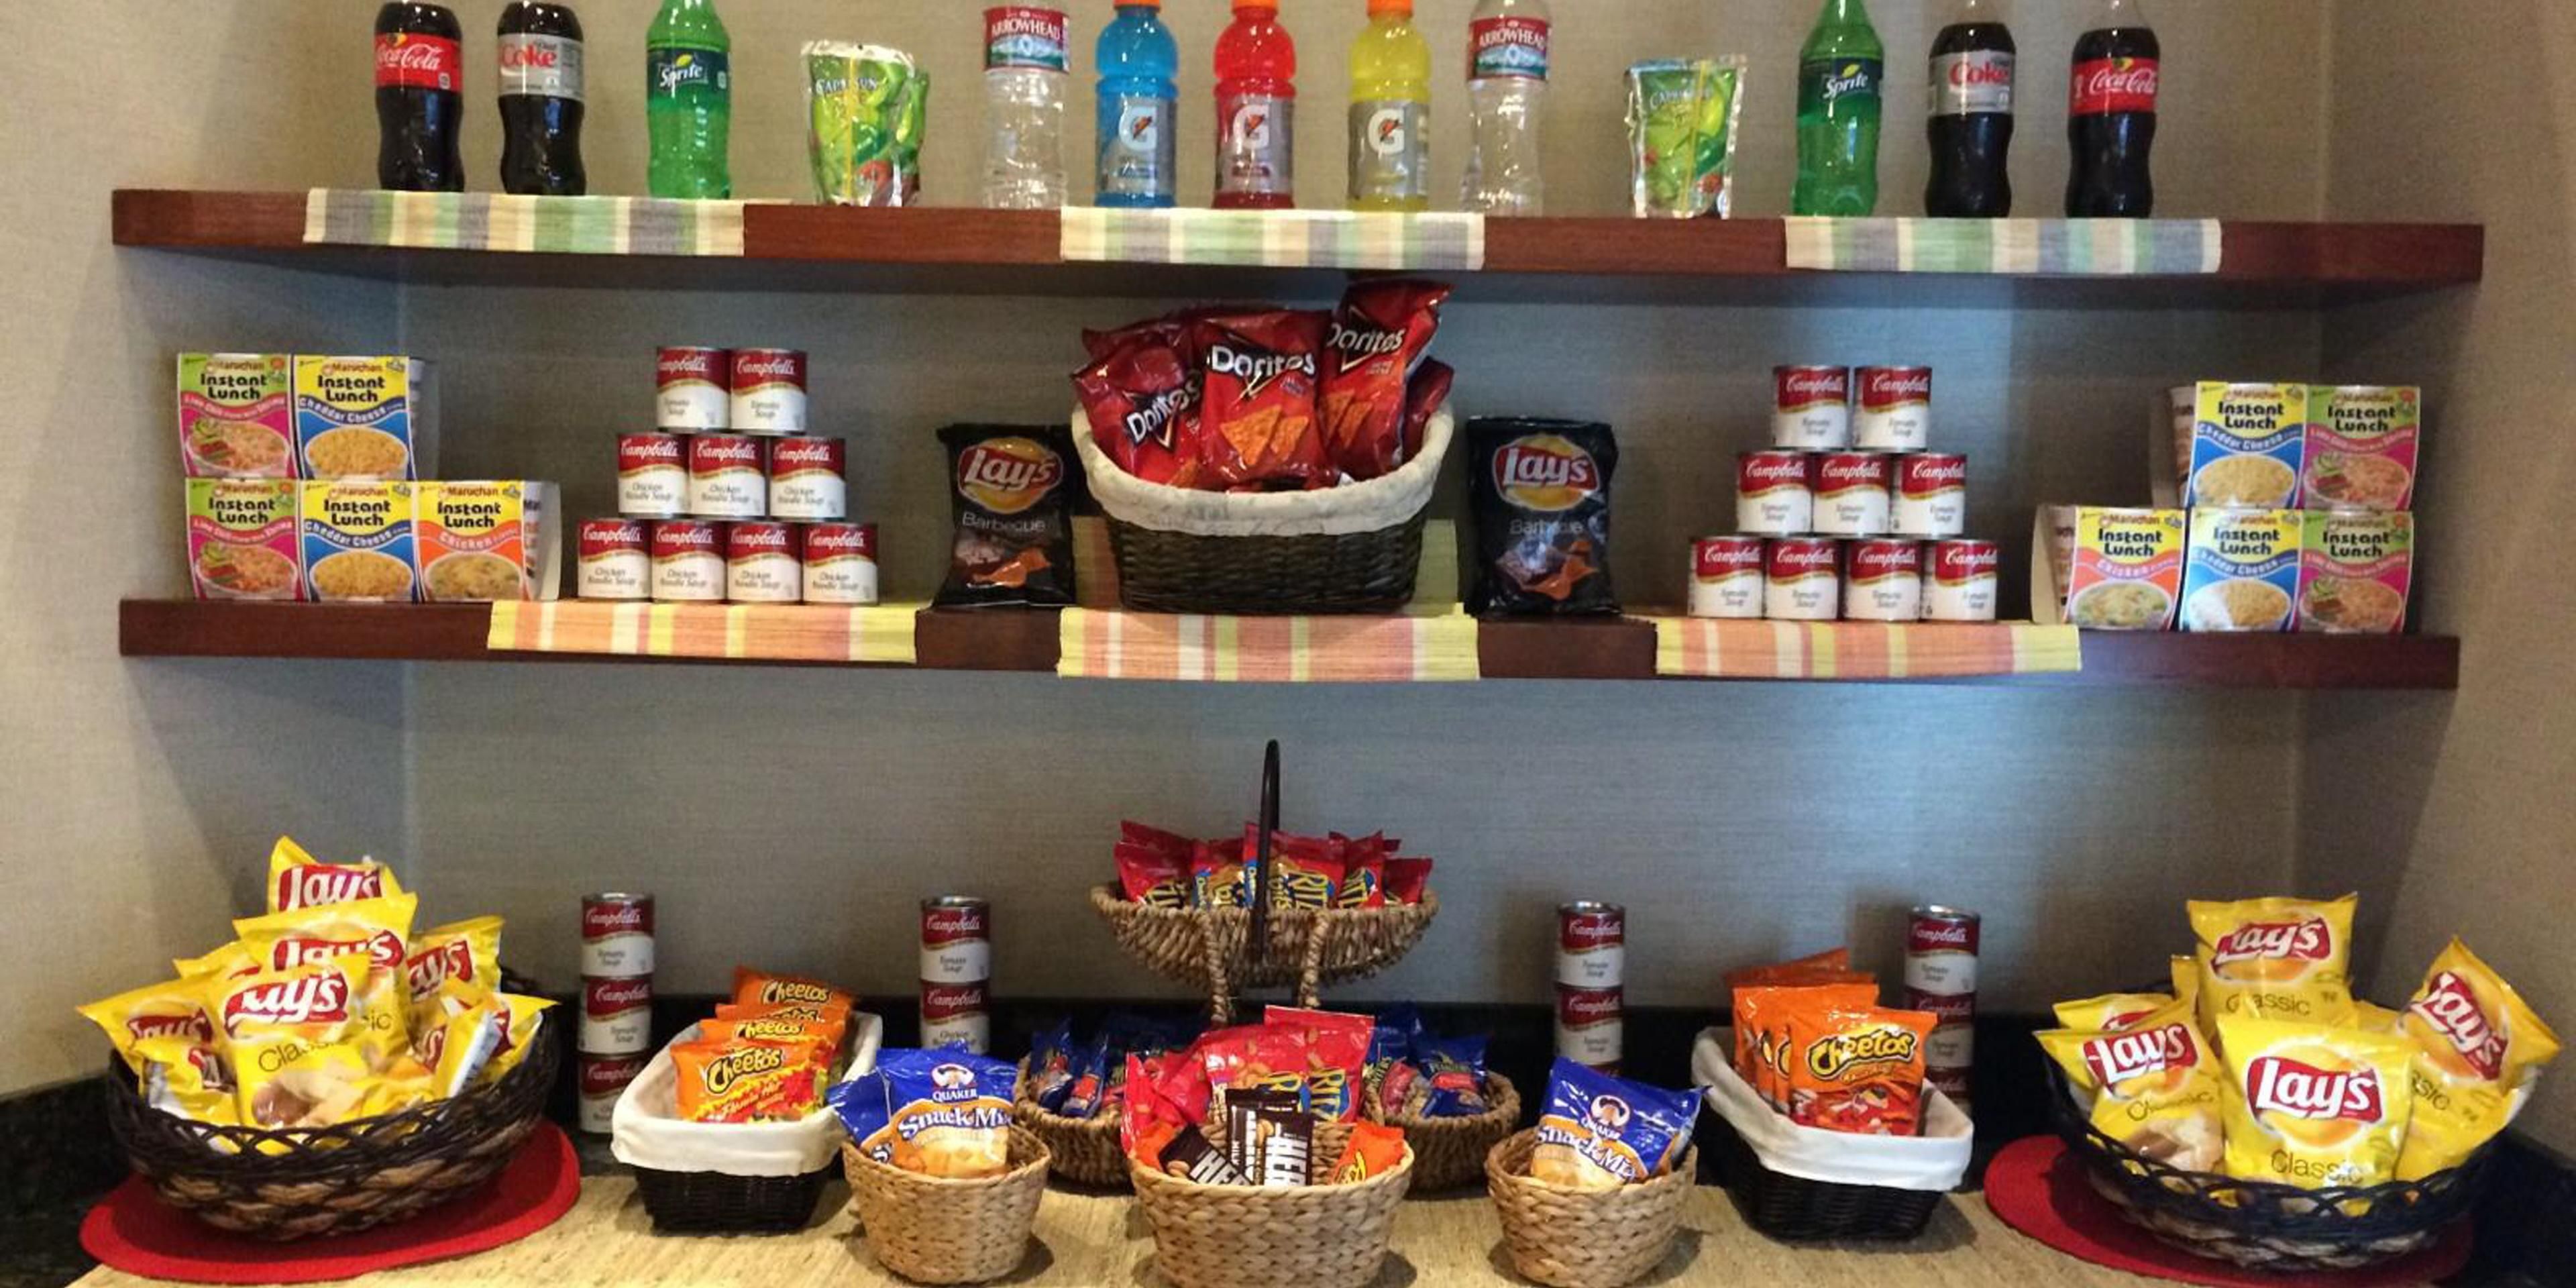 Need a late night snack or drink?  Our Marketplace has you covered with a wide array of snacks and drinks.